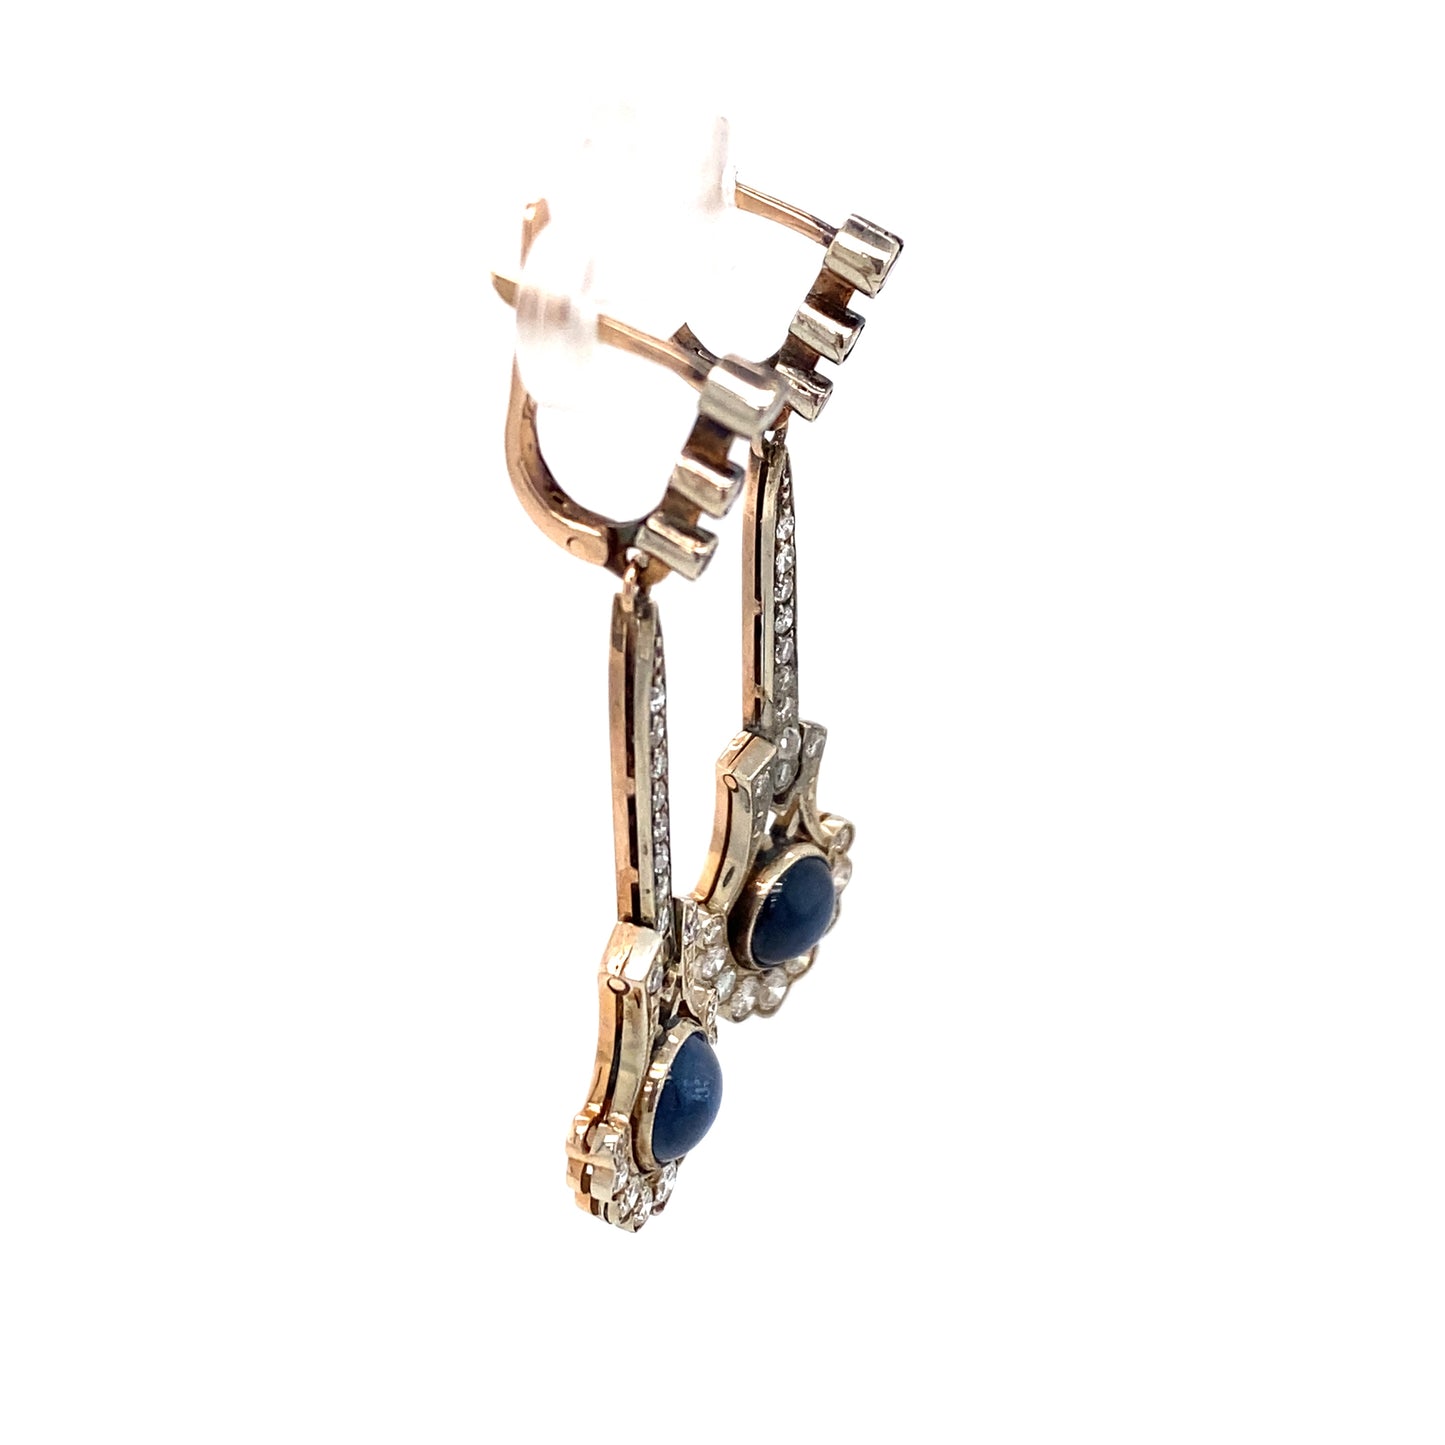 Circa 1940s Art Deco Style Cabochon Sapphire and Diamond Earrings in 14K White Gold, Made in Ukraine